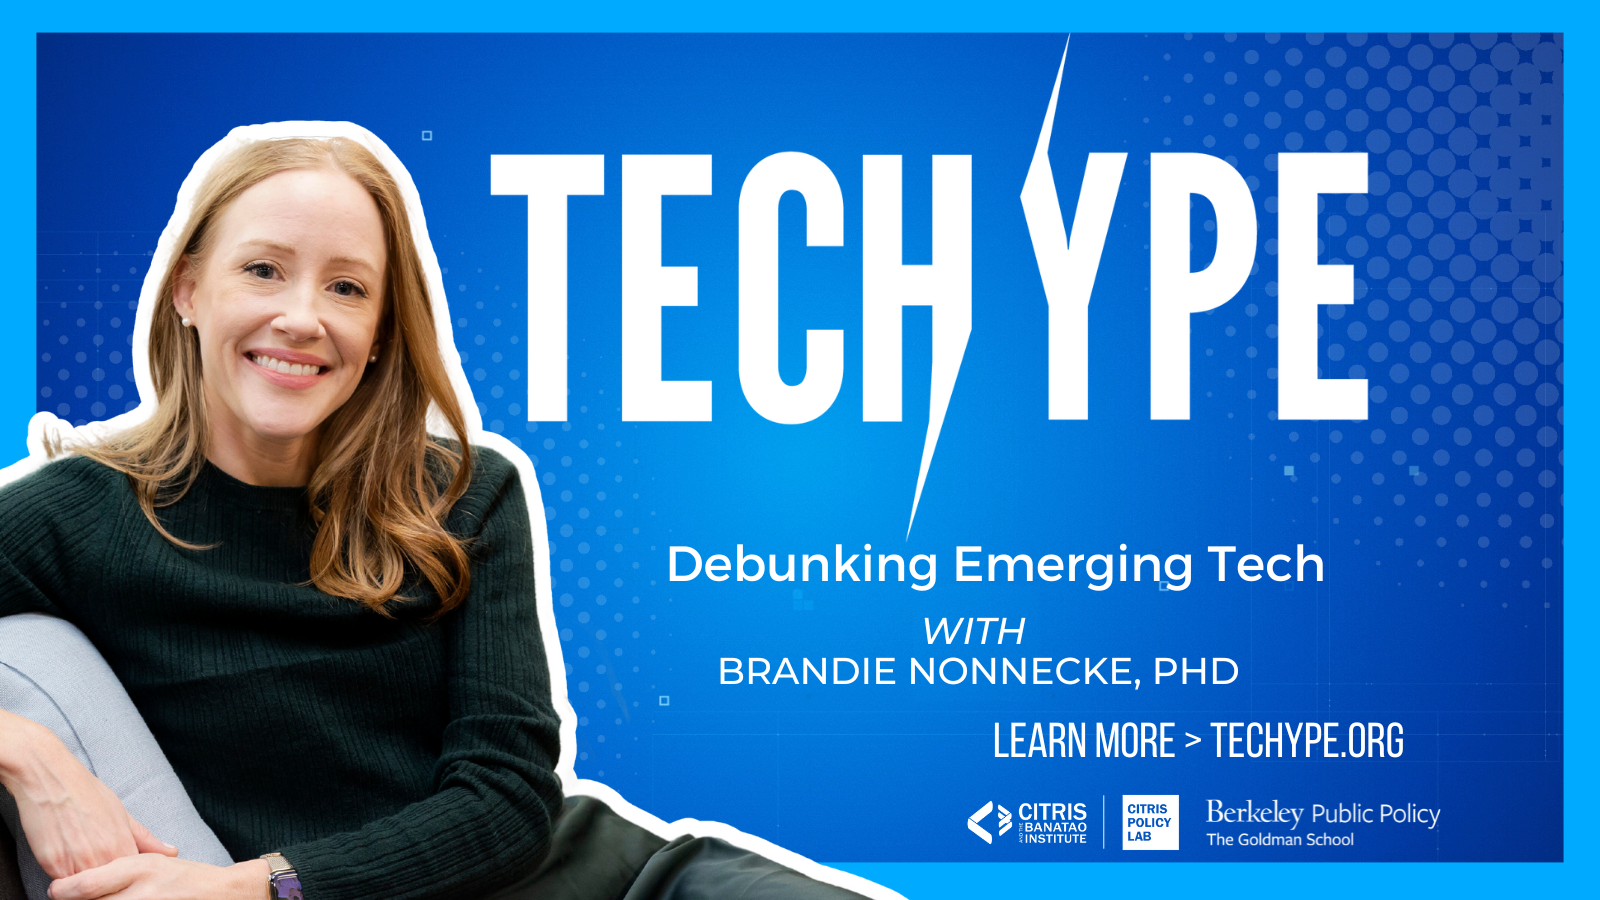 promotional image for Brandie Nonnecke's TecHype video series on emerging technology